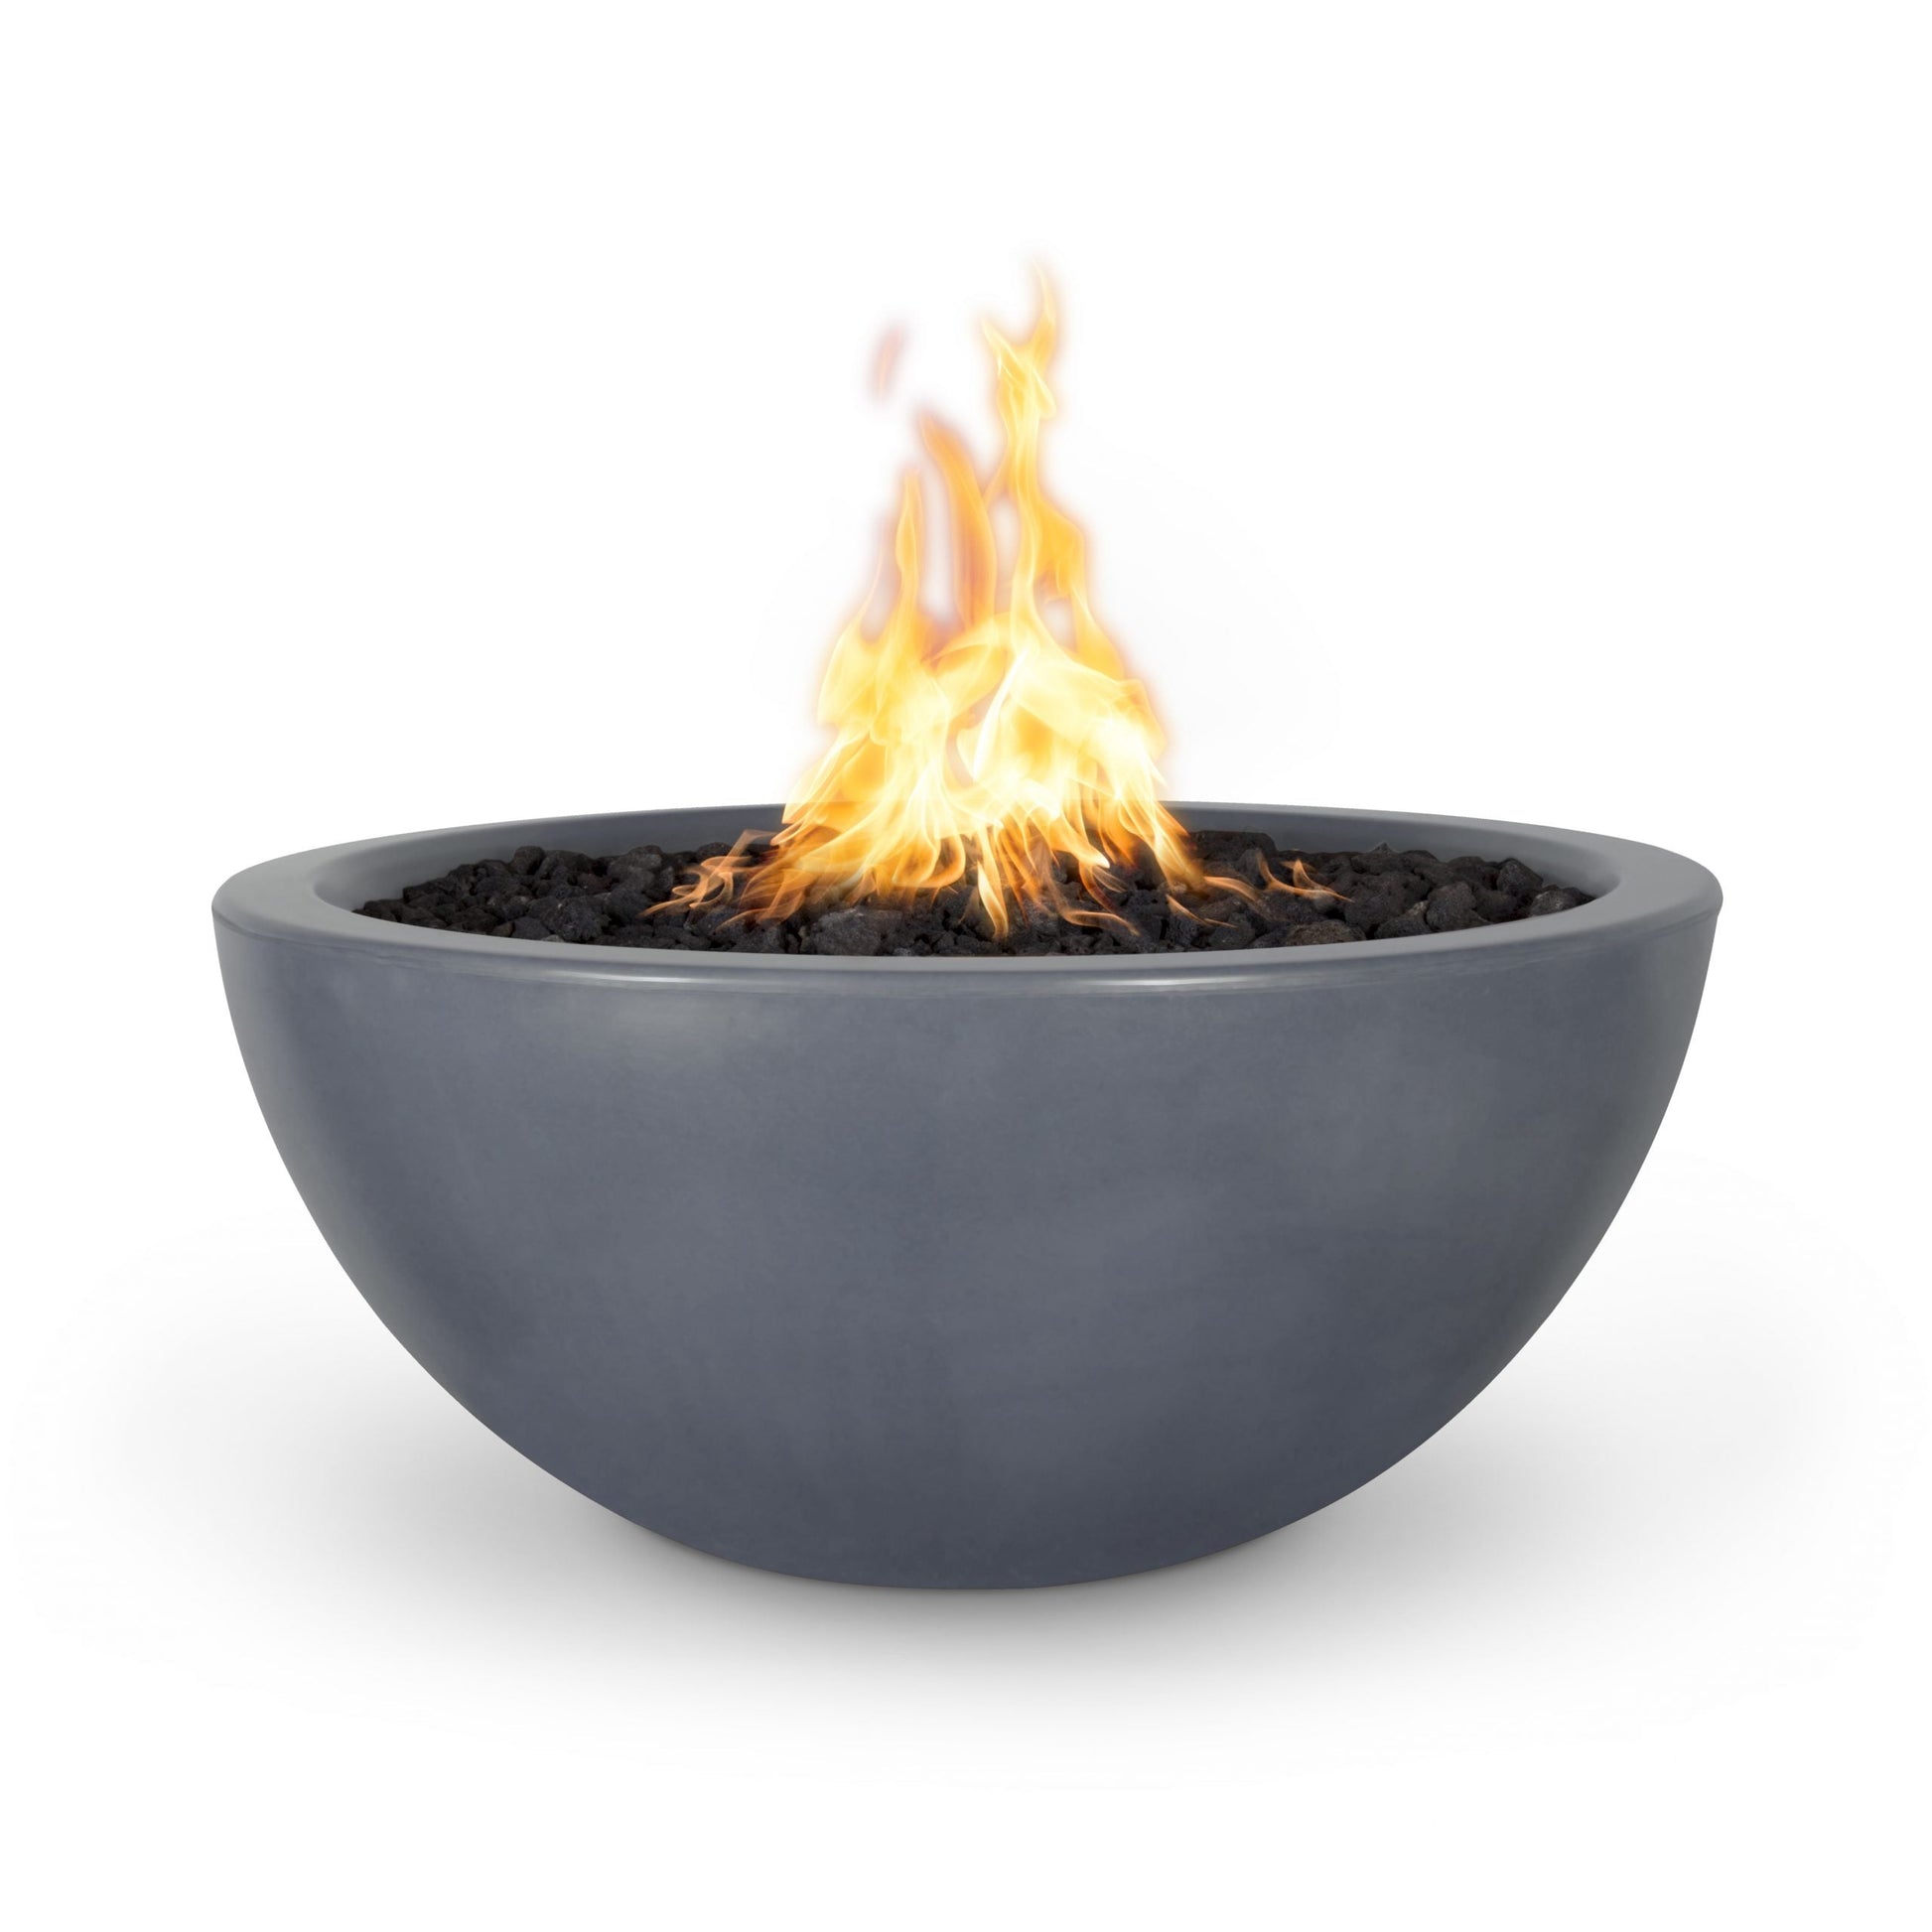 The Outdoor Plus Round Luna 30" Rustic White GFRC Concrete Liquid Propane Fire Bowl with Match Lit with Flame Sense Ignition